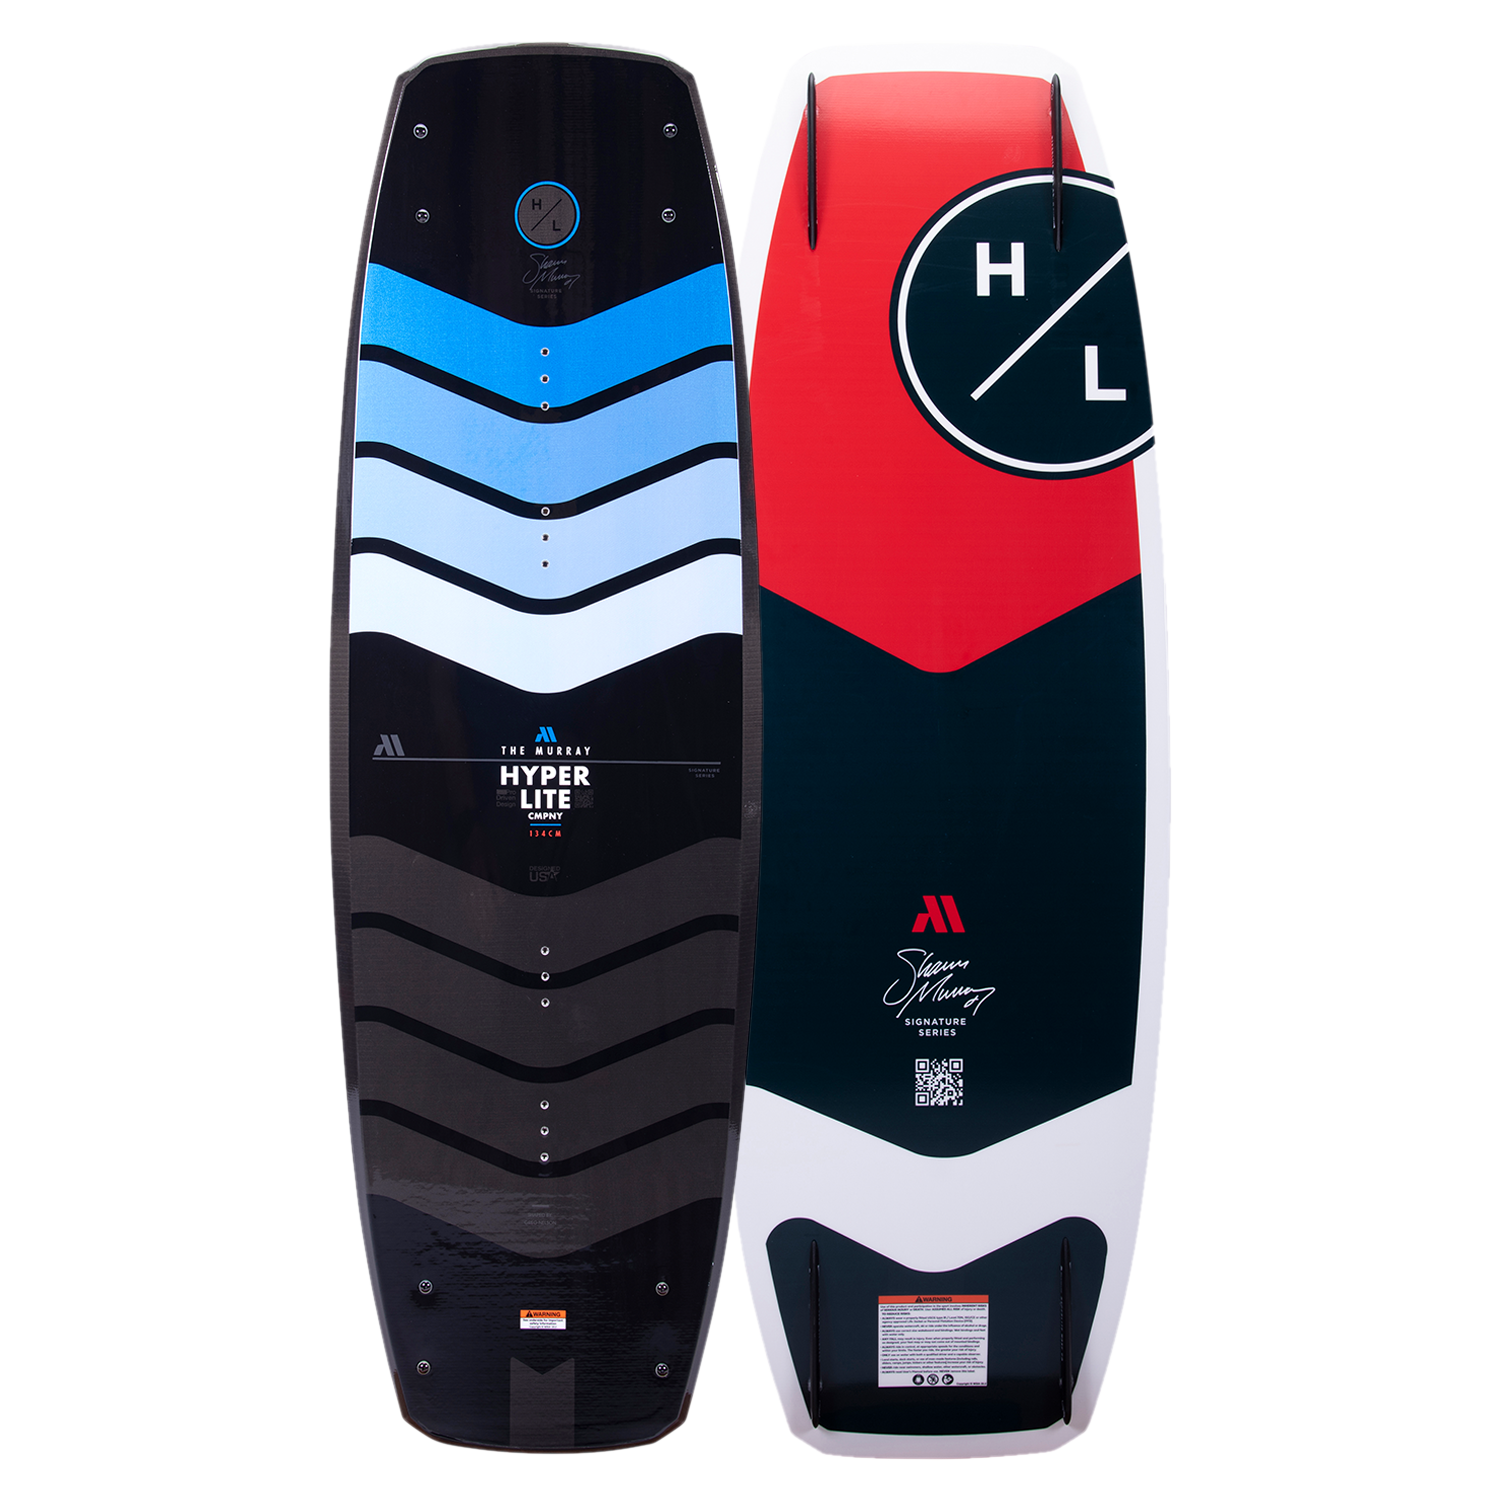 The Hyperlite 2023 Murray Pro wakeboard showcases a striking red, blue, and black design on its surface. With a subtle three-stage rocker, this wakeboard delivers optimal performance and style.